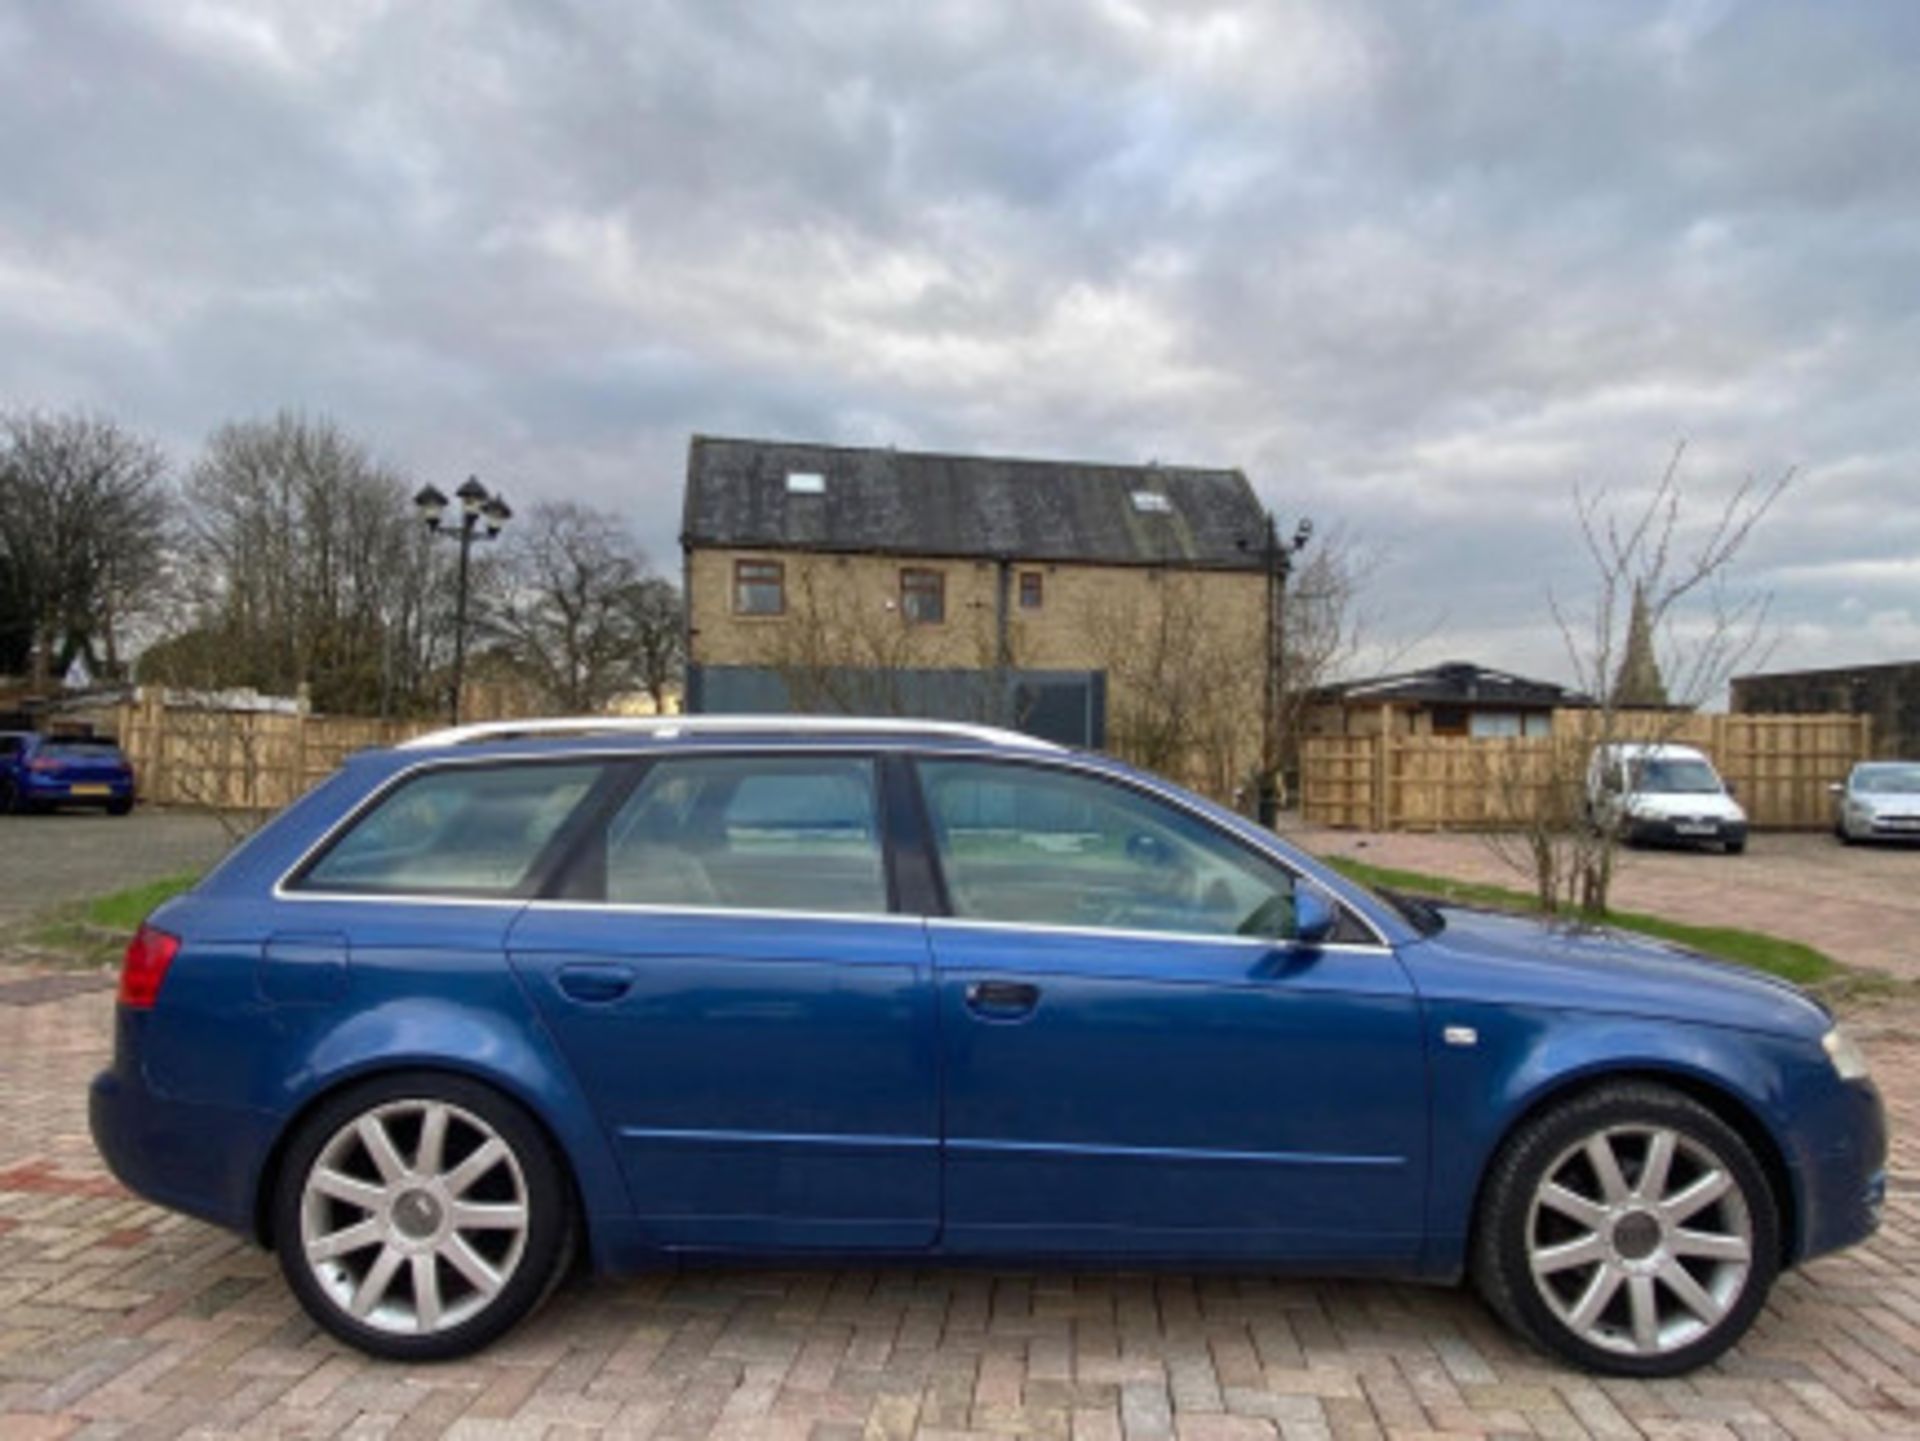 AUDI A4 AVANT 1.9 TDI SE 5DR ESTATE - RARE AND RELIABLE LUXURY WAGON >>--NO VAT ON HAMMER--<< - Image 42 of 97